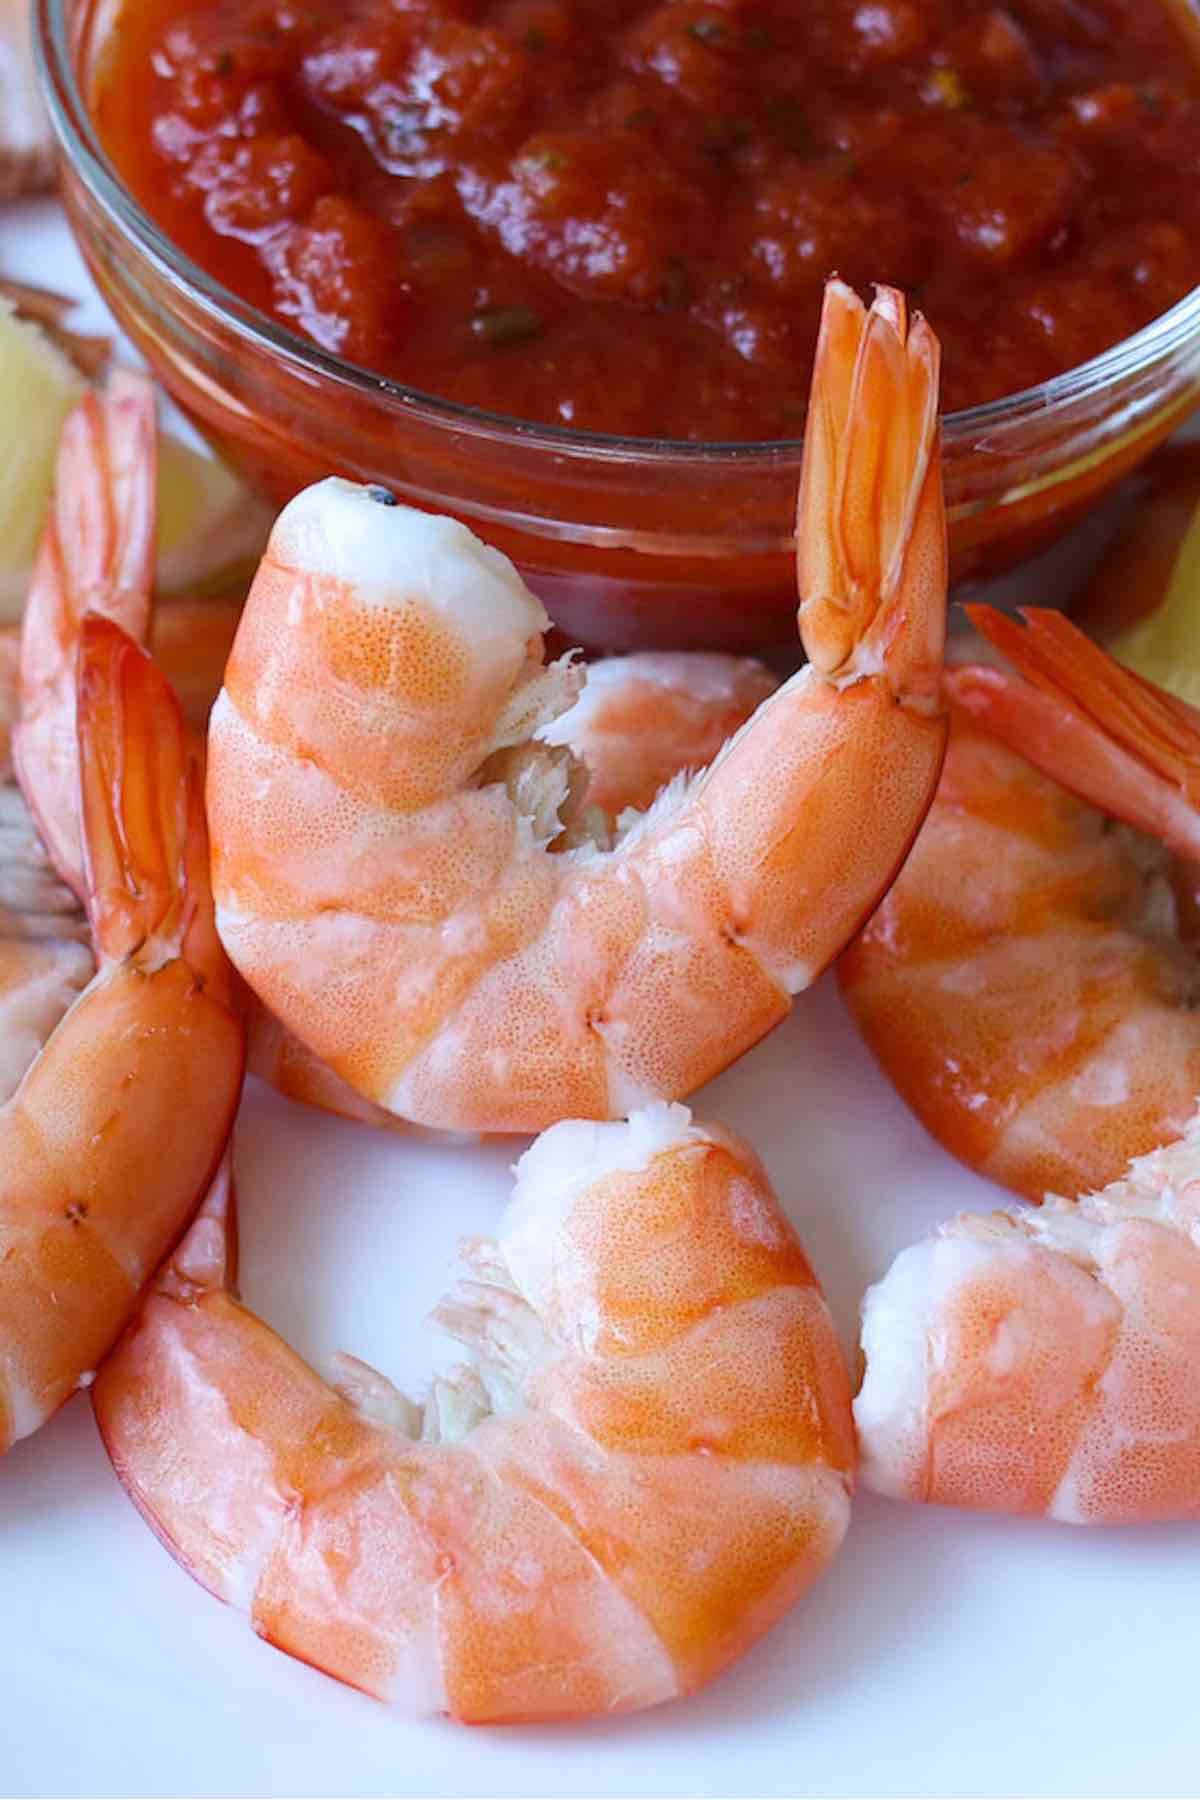 Did you know that you can cook frozen shrimp straight out of the freezer with no thawing necessary? Once you learn some simple tips, you’ll get juicy and delicious shrimp every time. We’ve covered different easy methods on cooking frozen shrimp.